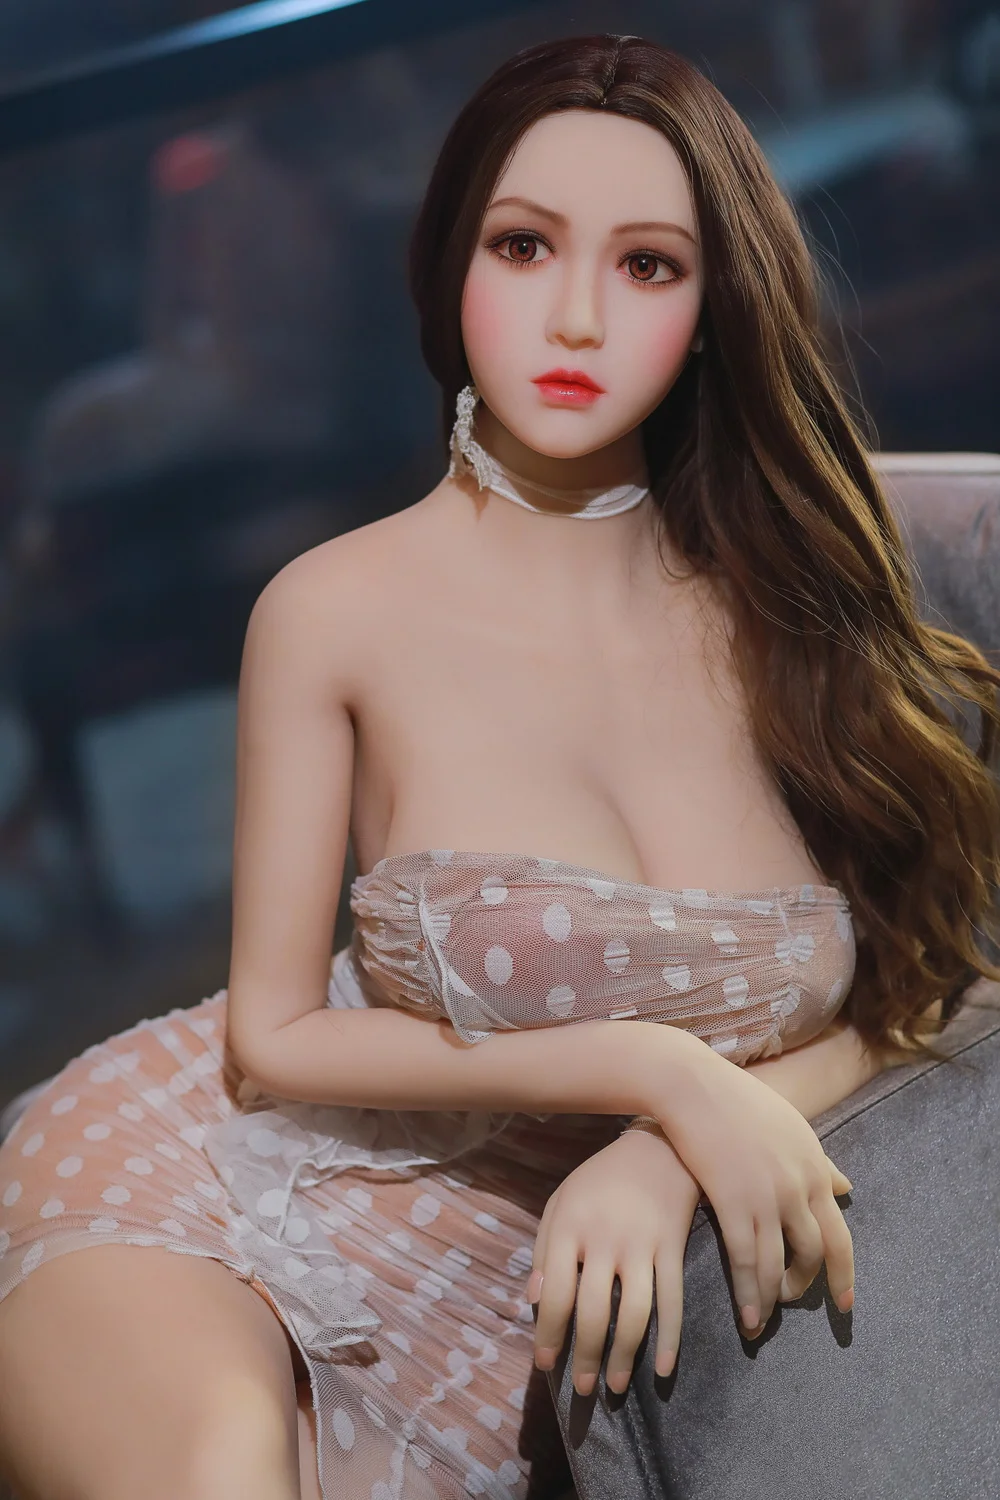 Sex doll sitting on a chair with hands on the armrests